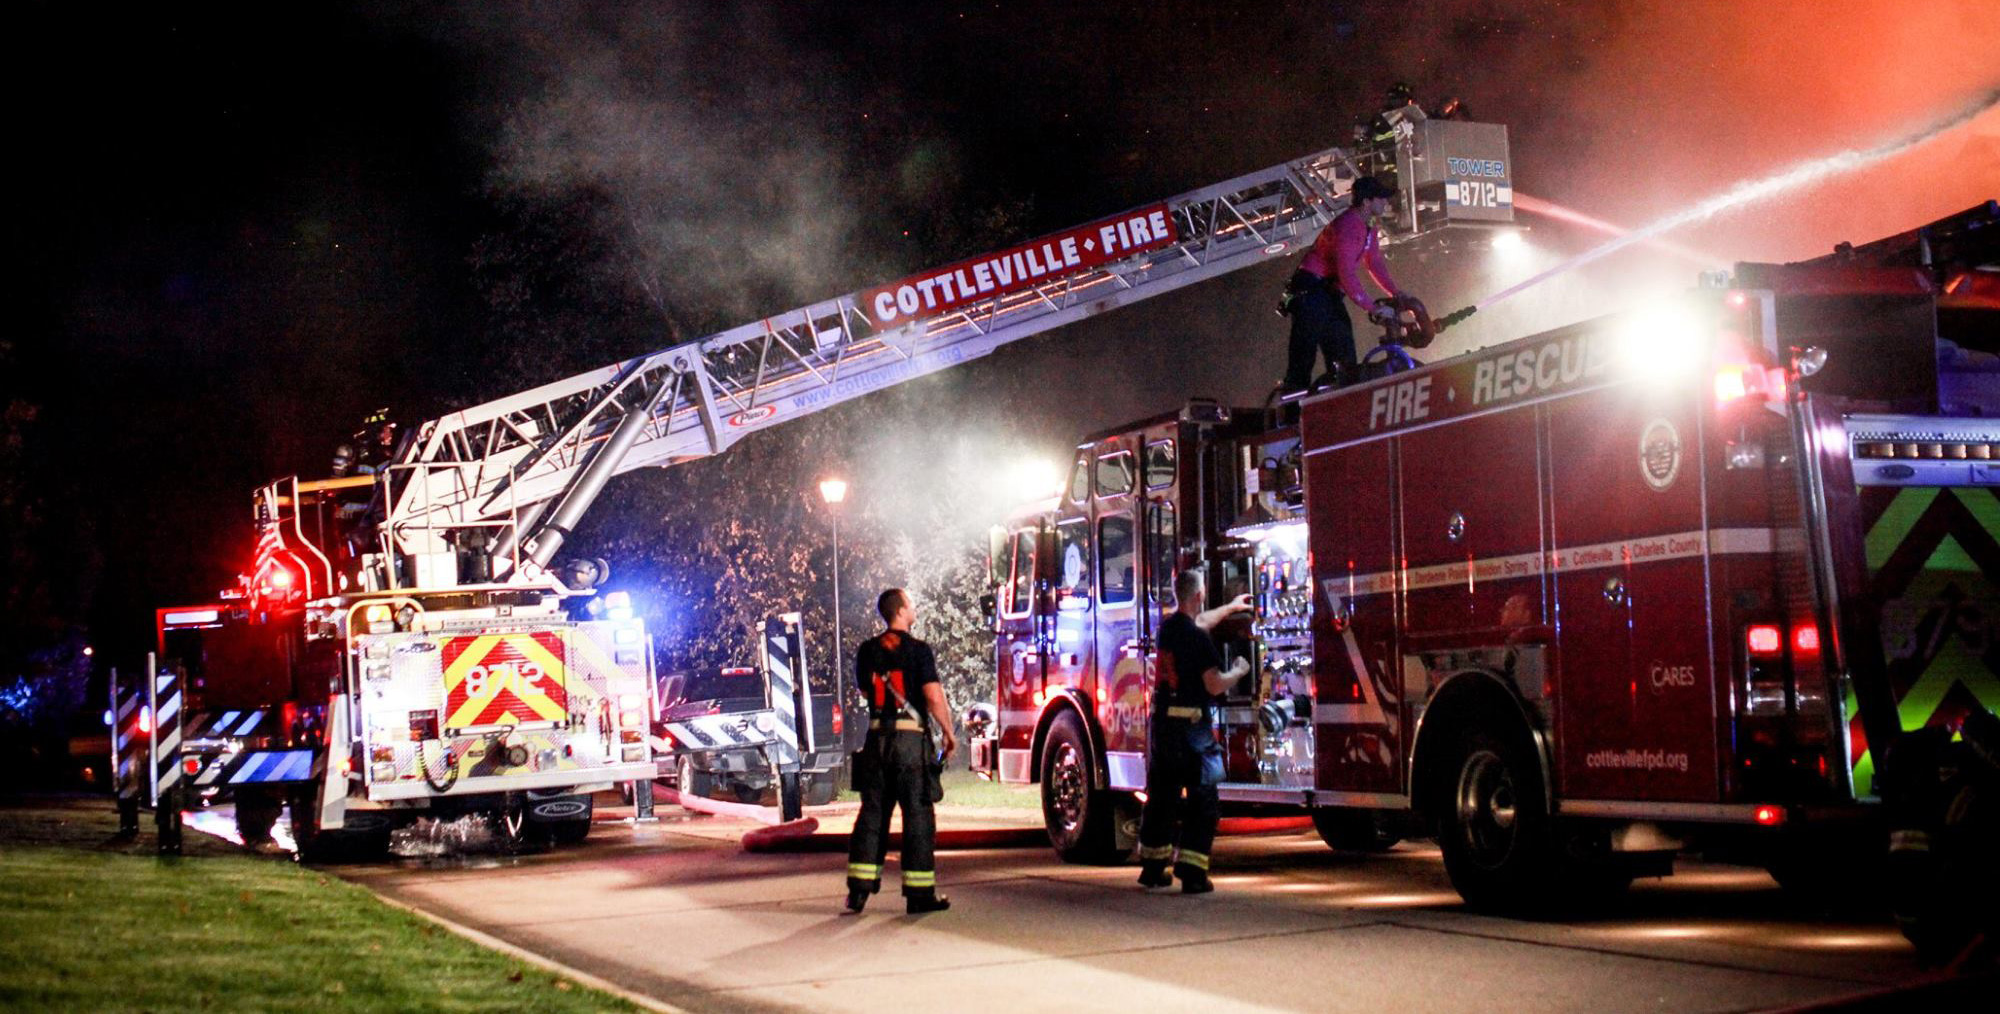 Cottleville Fire crew working a night-time fire